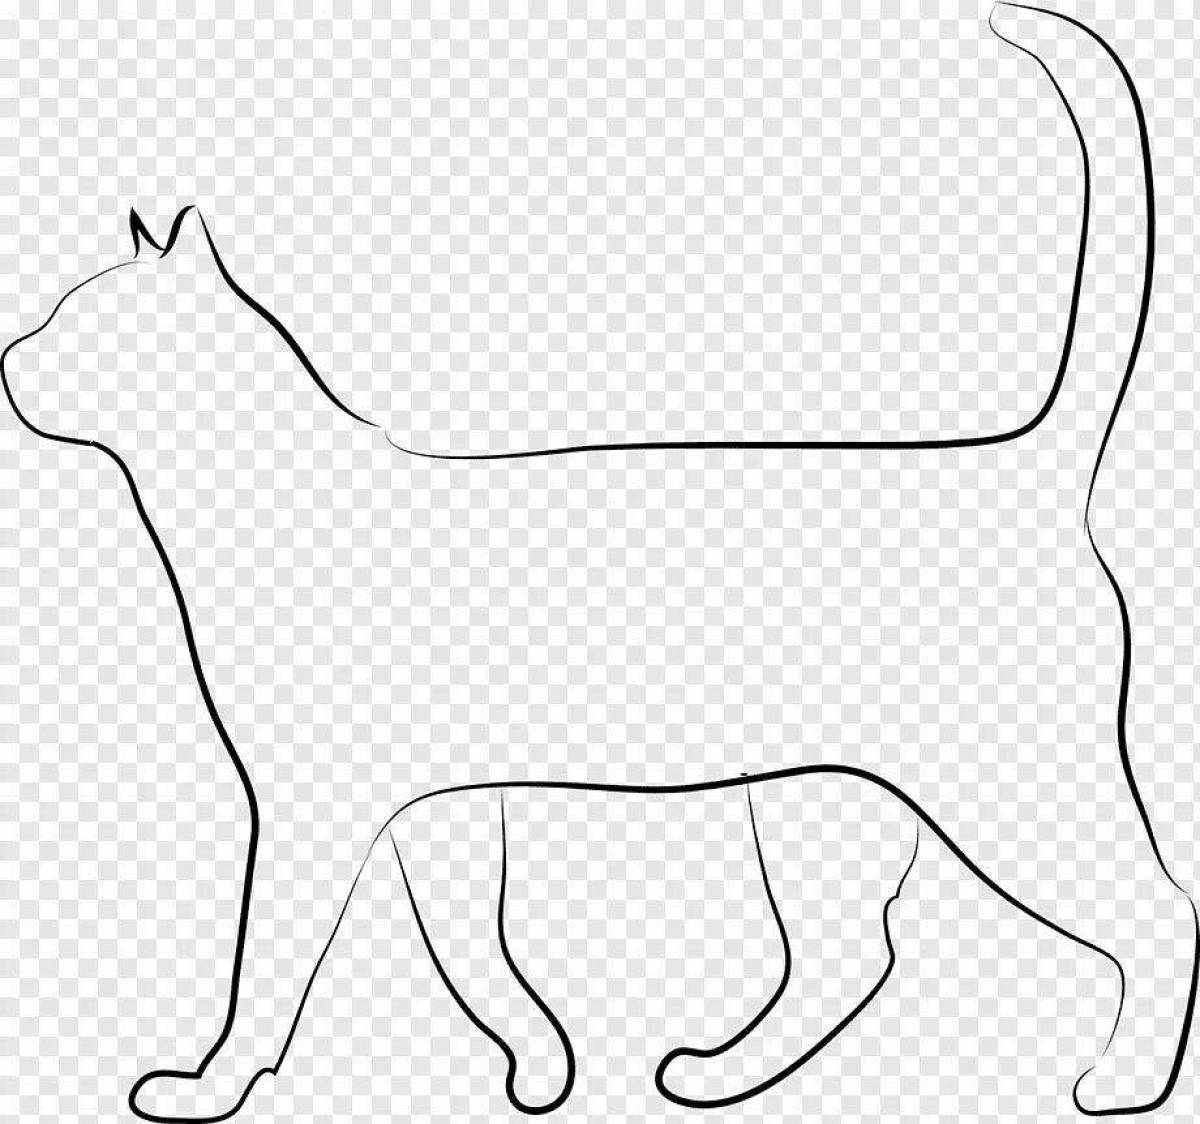 Coloring page dazzling cat silhouette